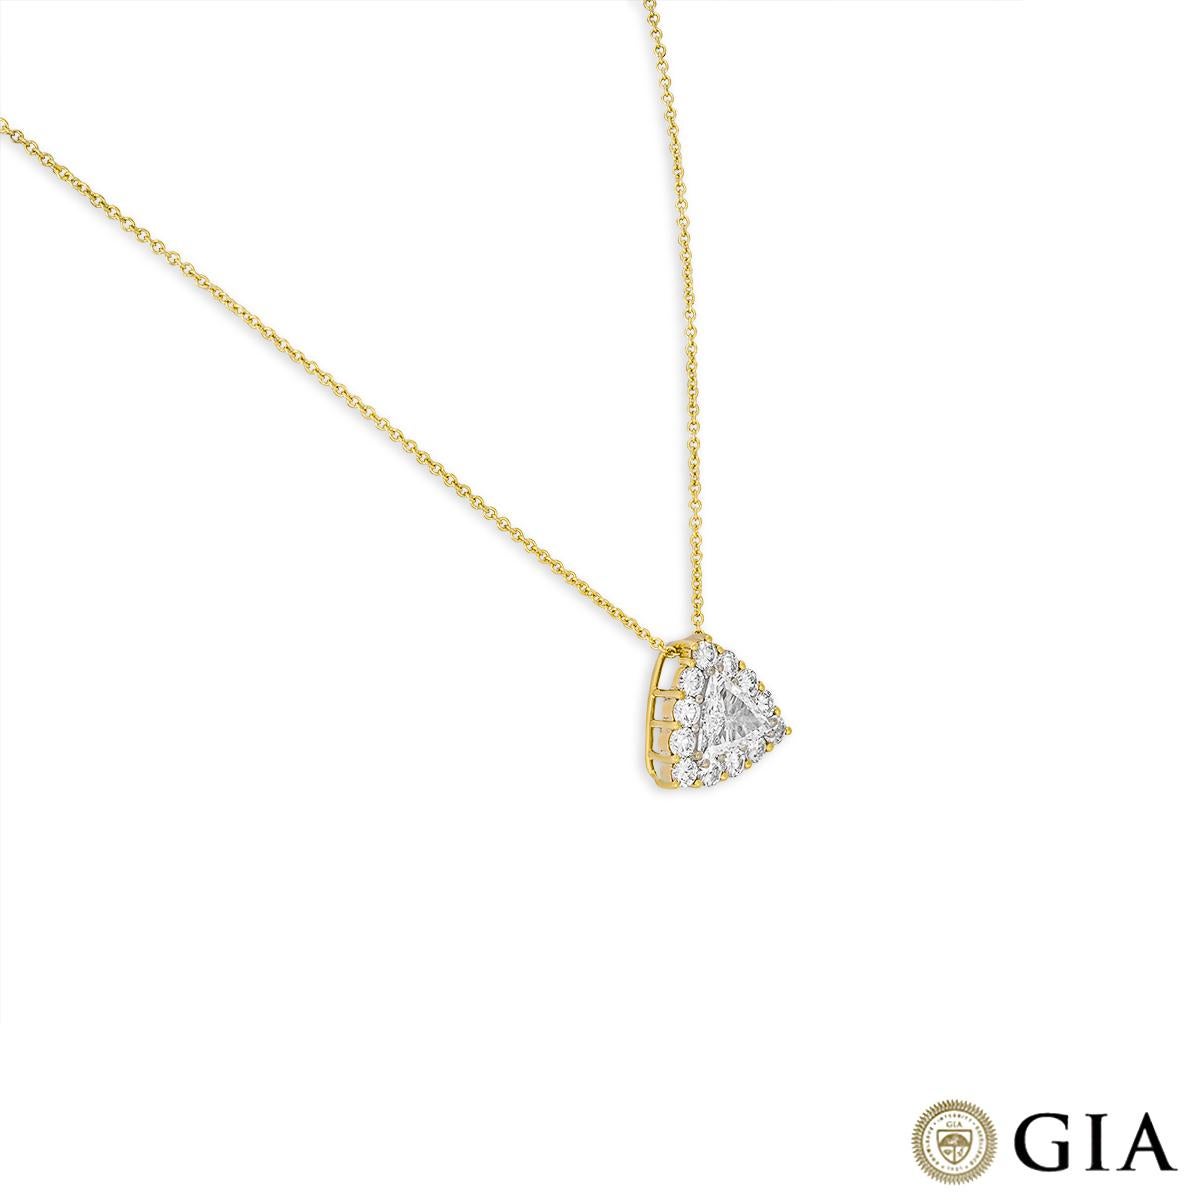 A dazzling 18k yellow gold diamond halo pendant. The pendant is set the the centre with a trillion cut diamond weighing 1.00ct, F colour and SI2 clarity. Complementing the centre stone are 12 round brilliant cut diamonds set in a halo with an